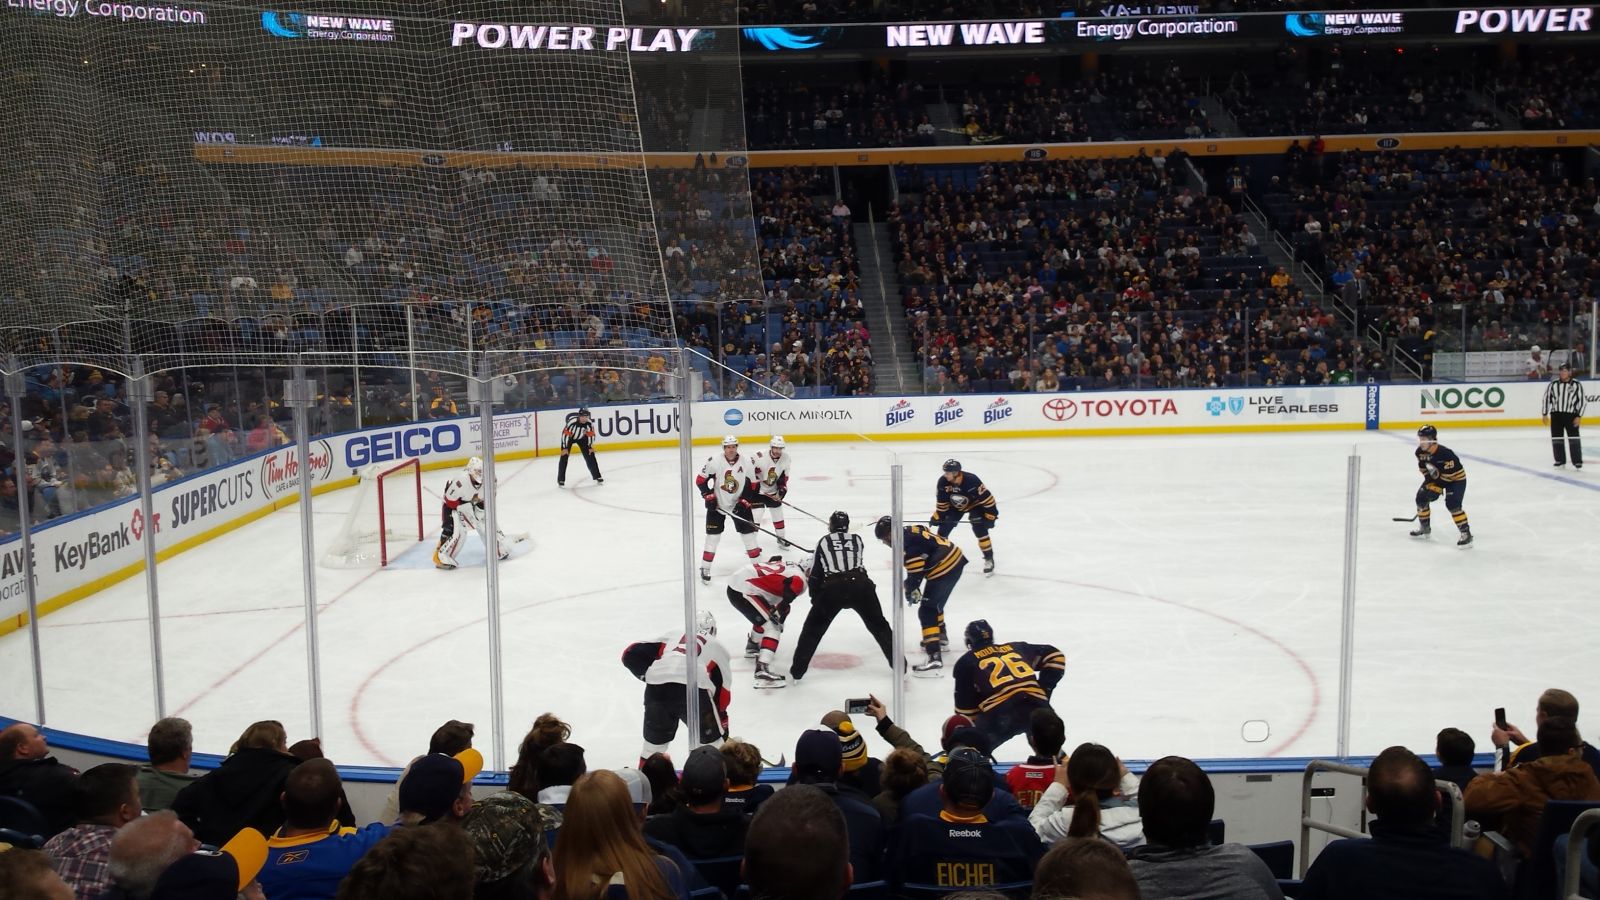 section 107, row 10 seat view  for hockey - keybank center